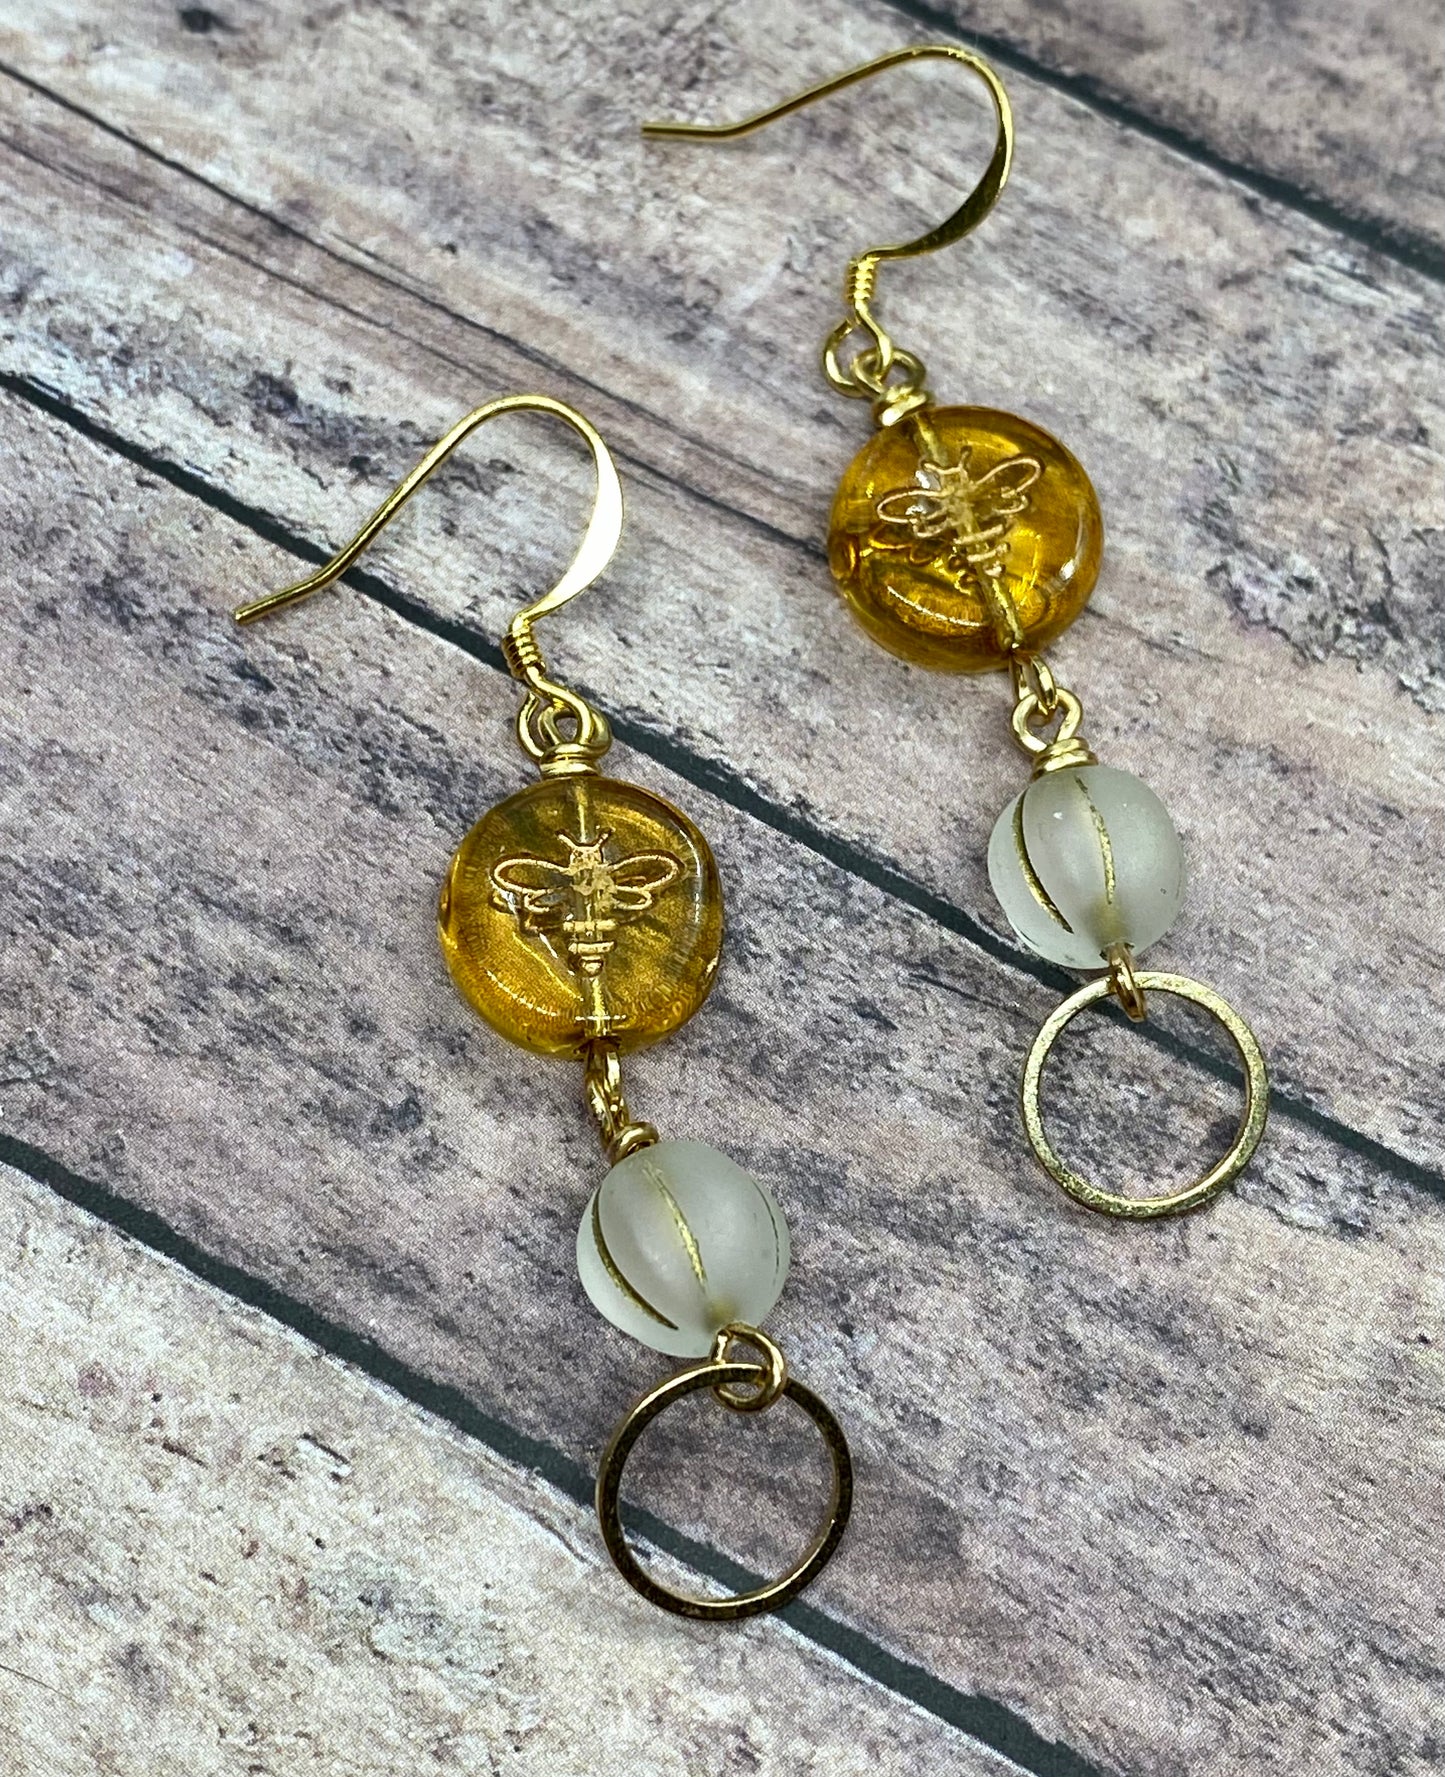 Bee handcrafted earrings.  Item #s1123-e07